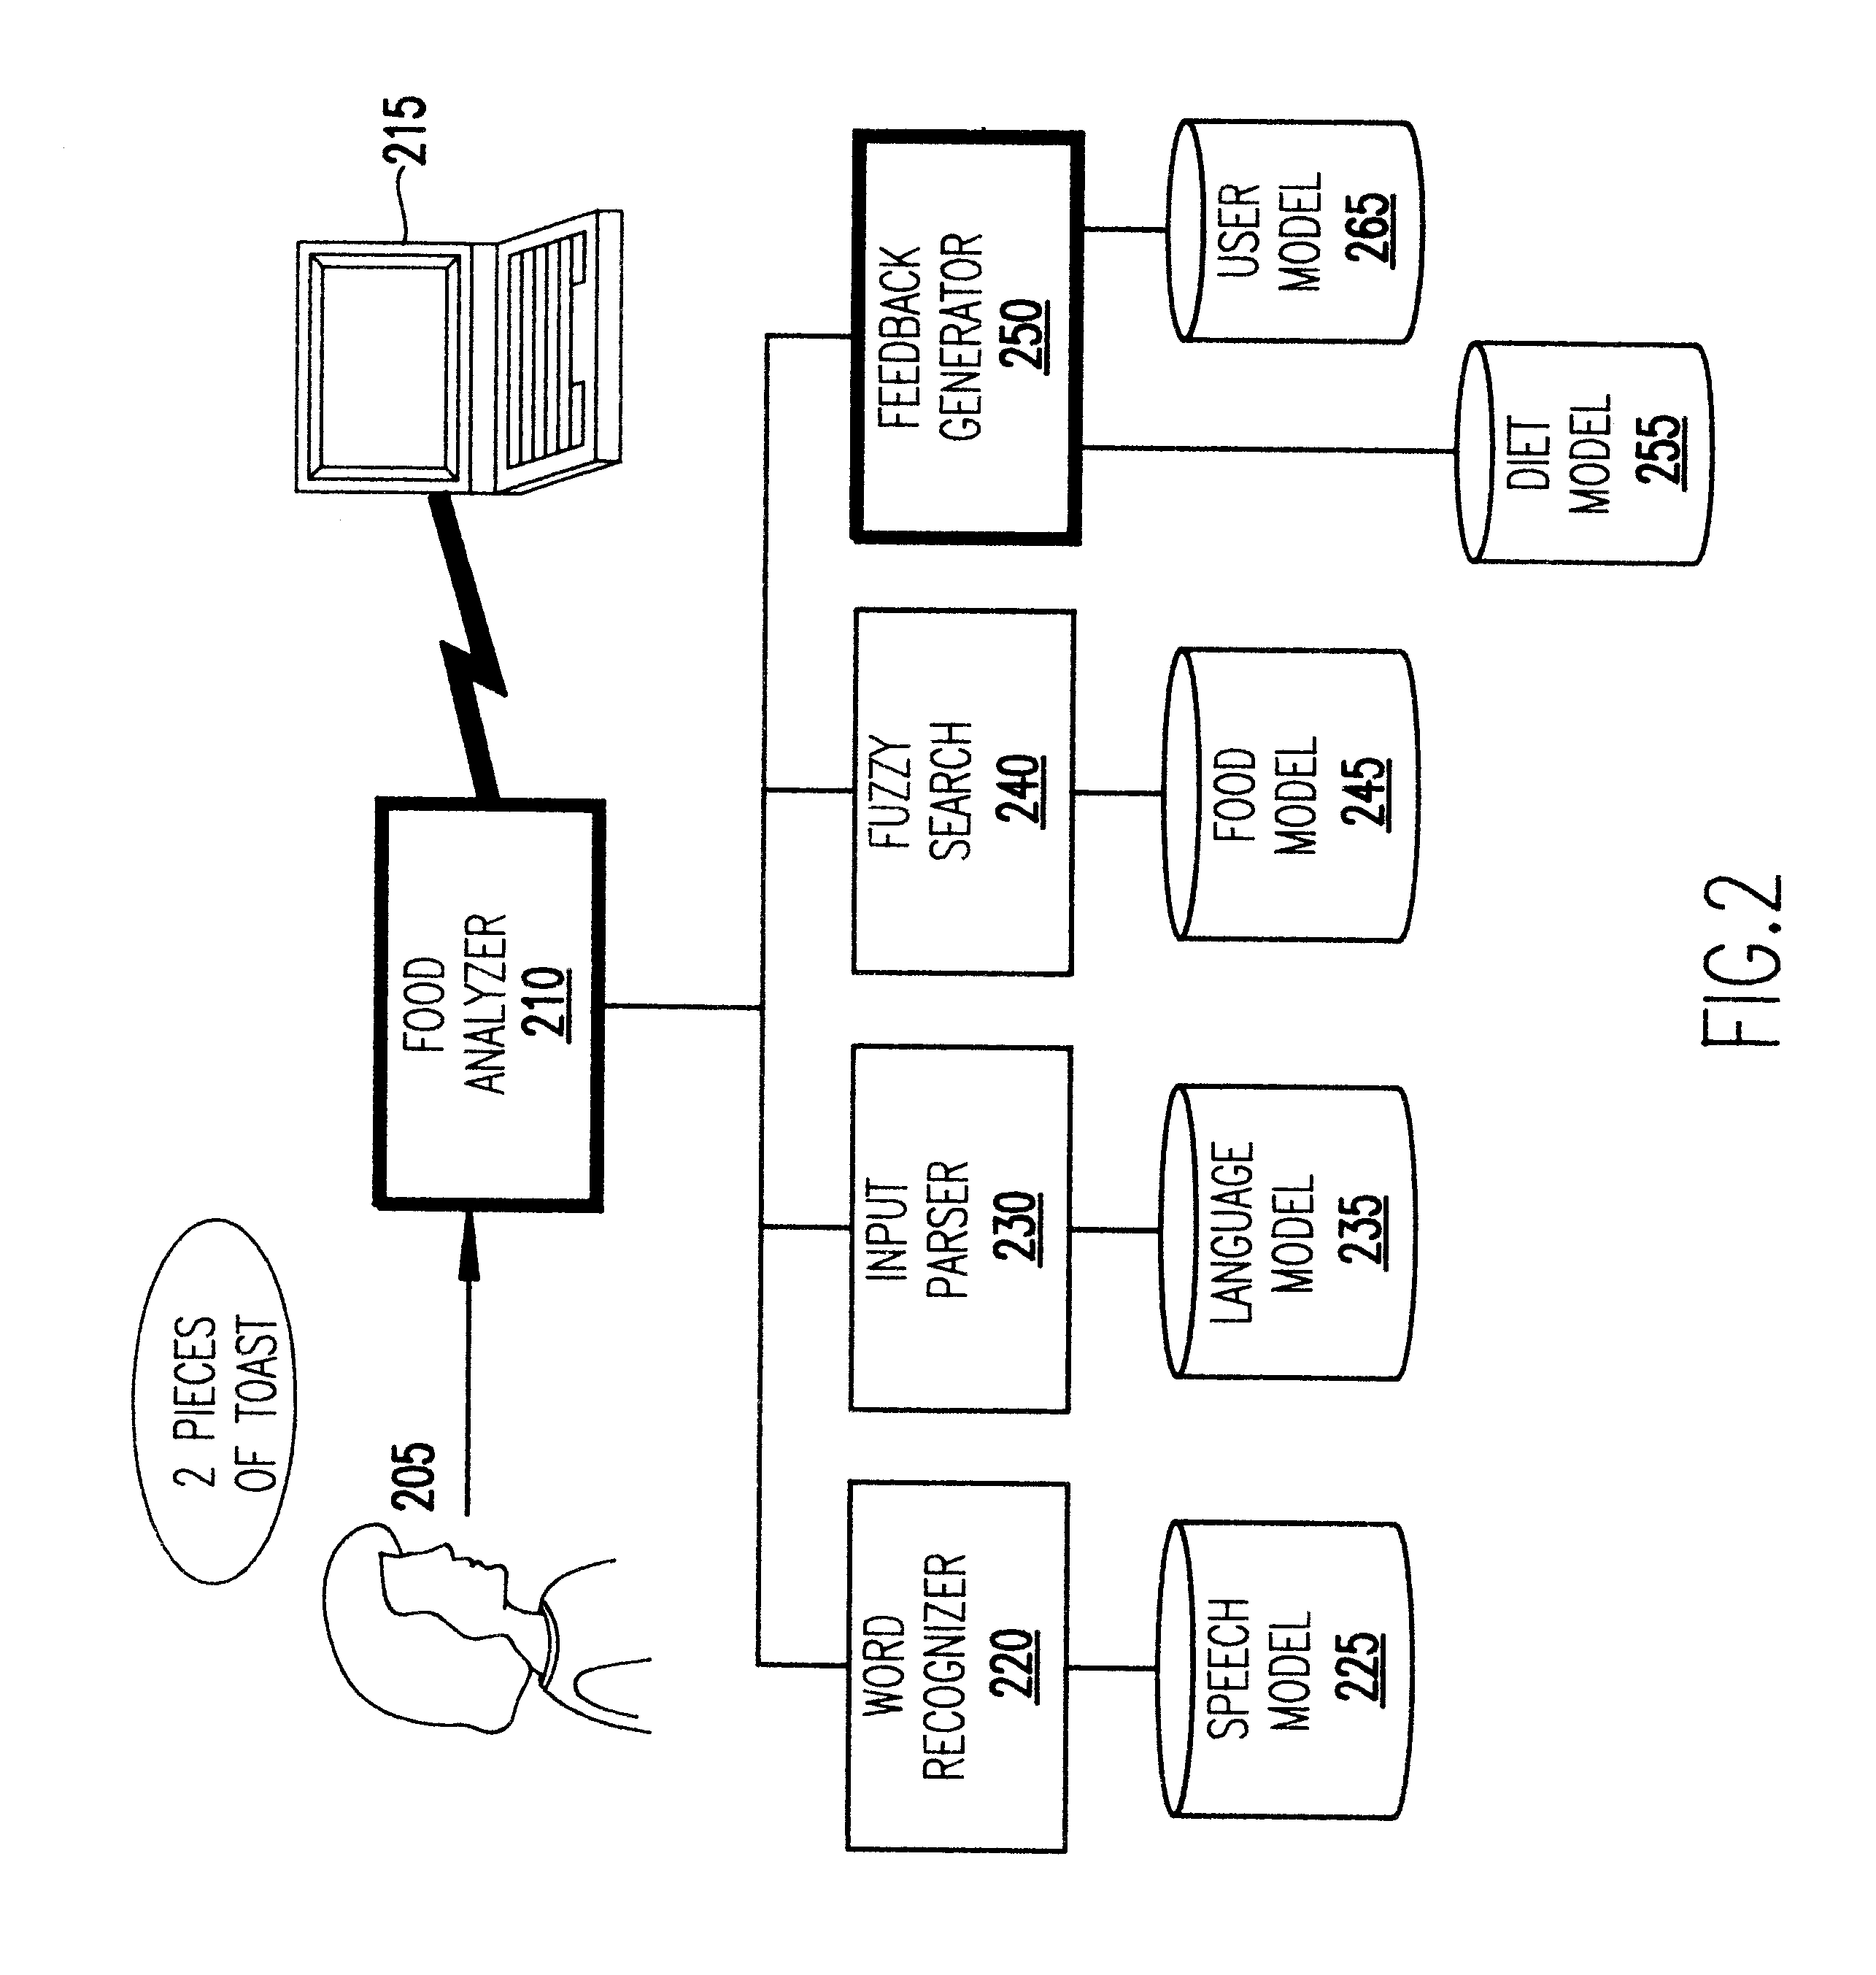 User state sensitive system and method for nutrient analysis using natural language interface